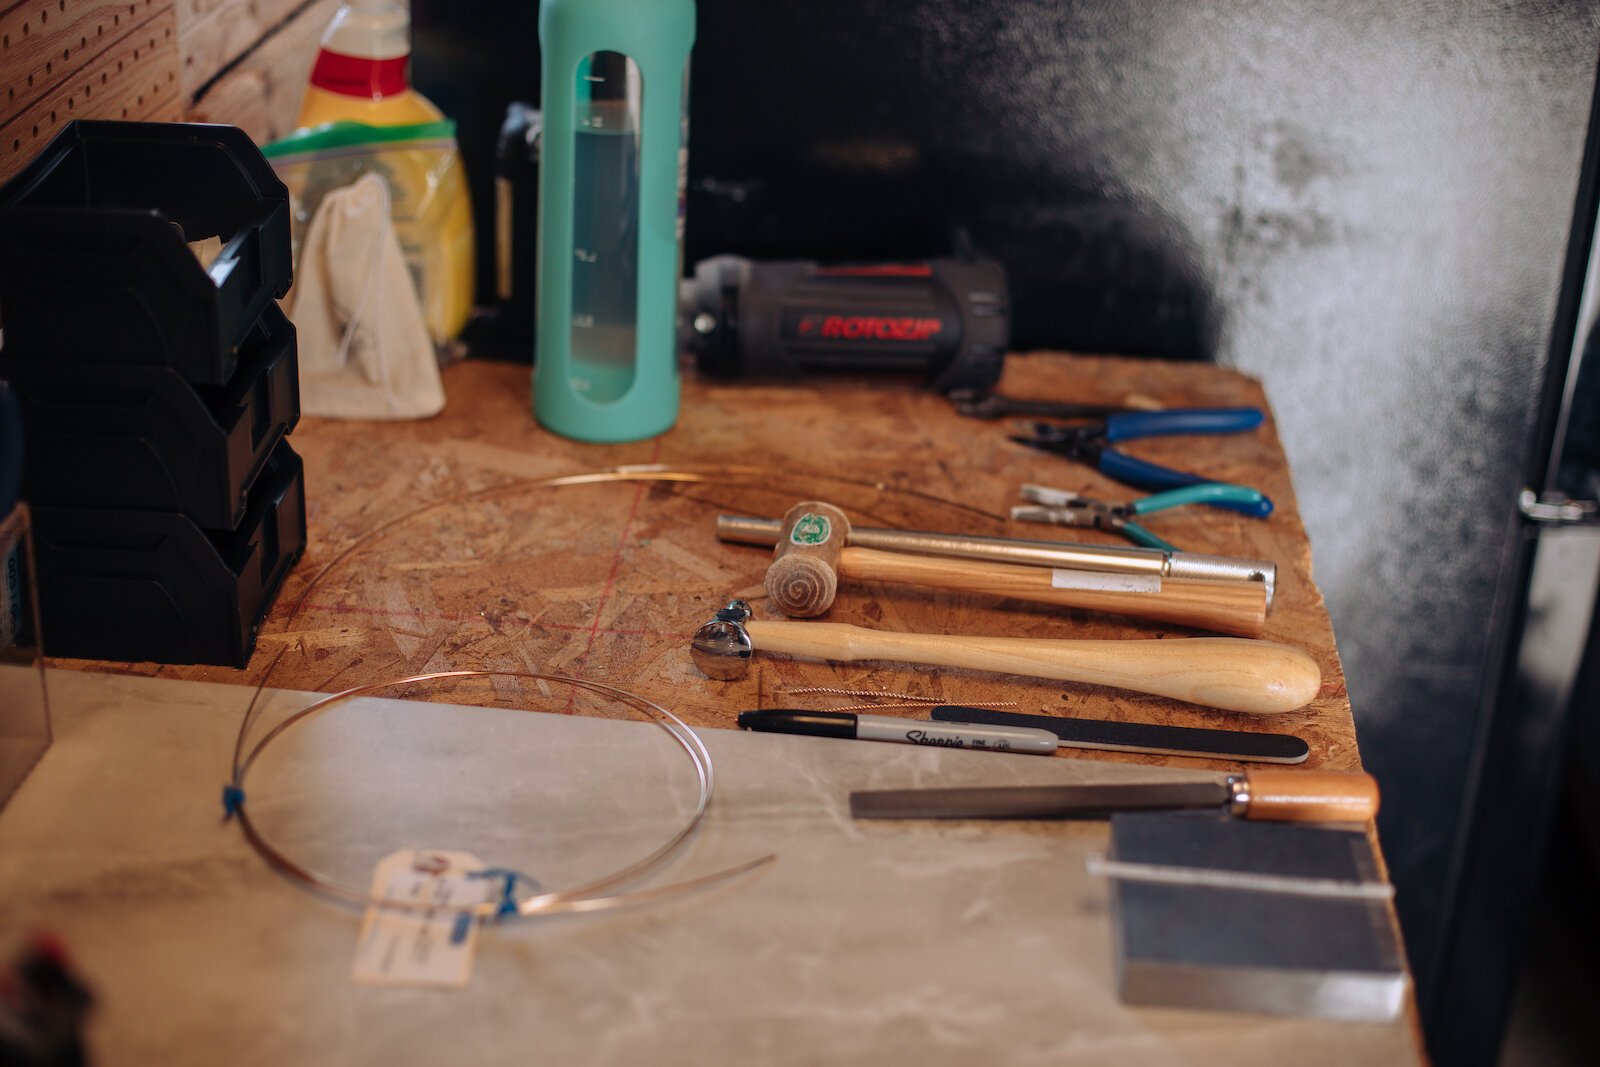 Tools for jewelry making at the workspace of Raelyn Bever, owner of Still Remains Jewelry.